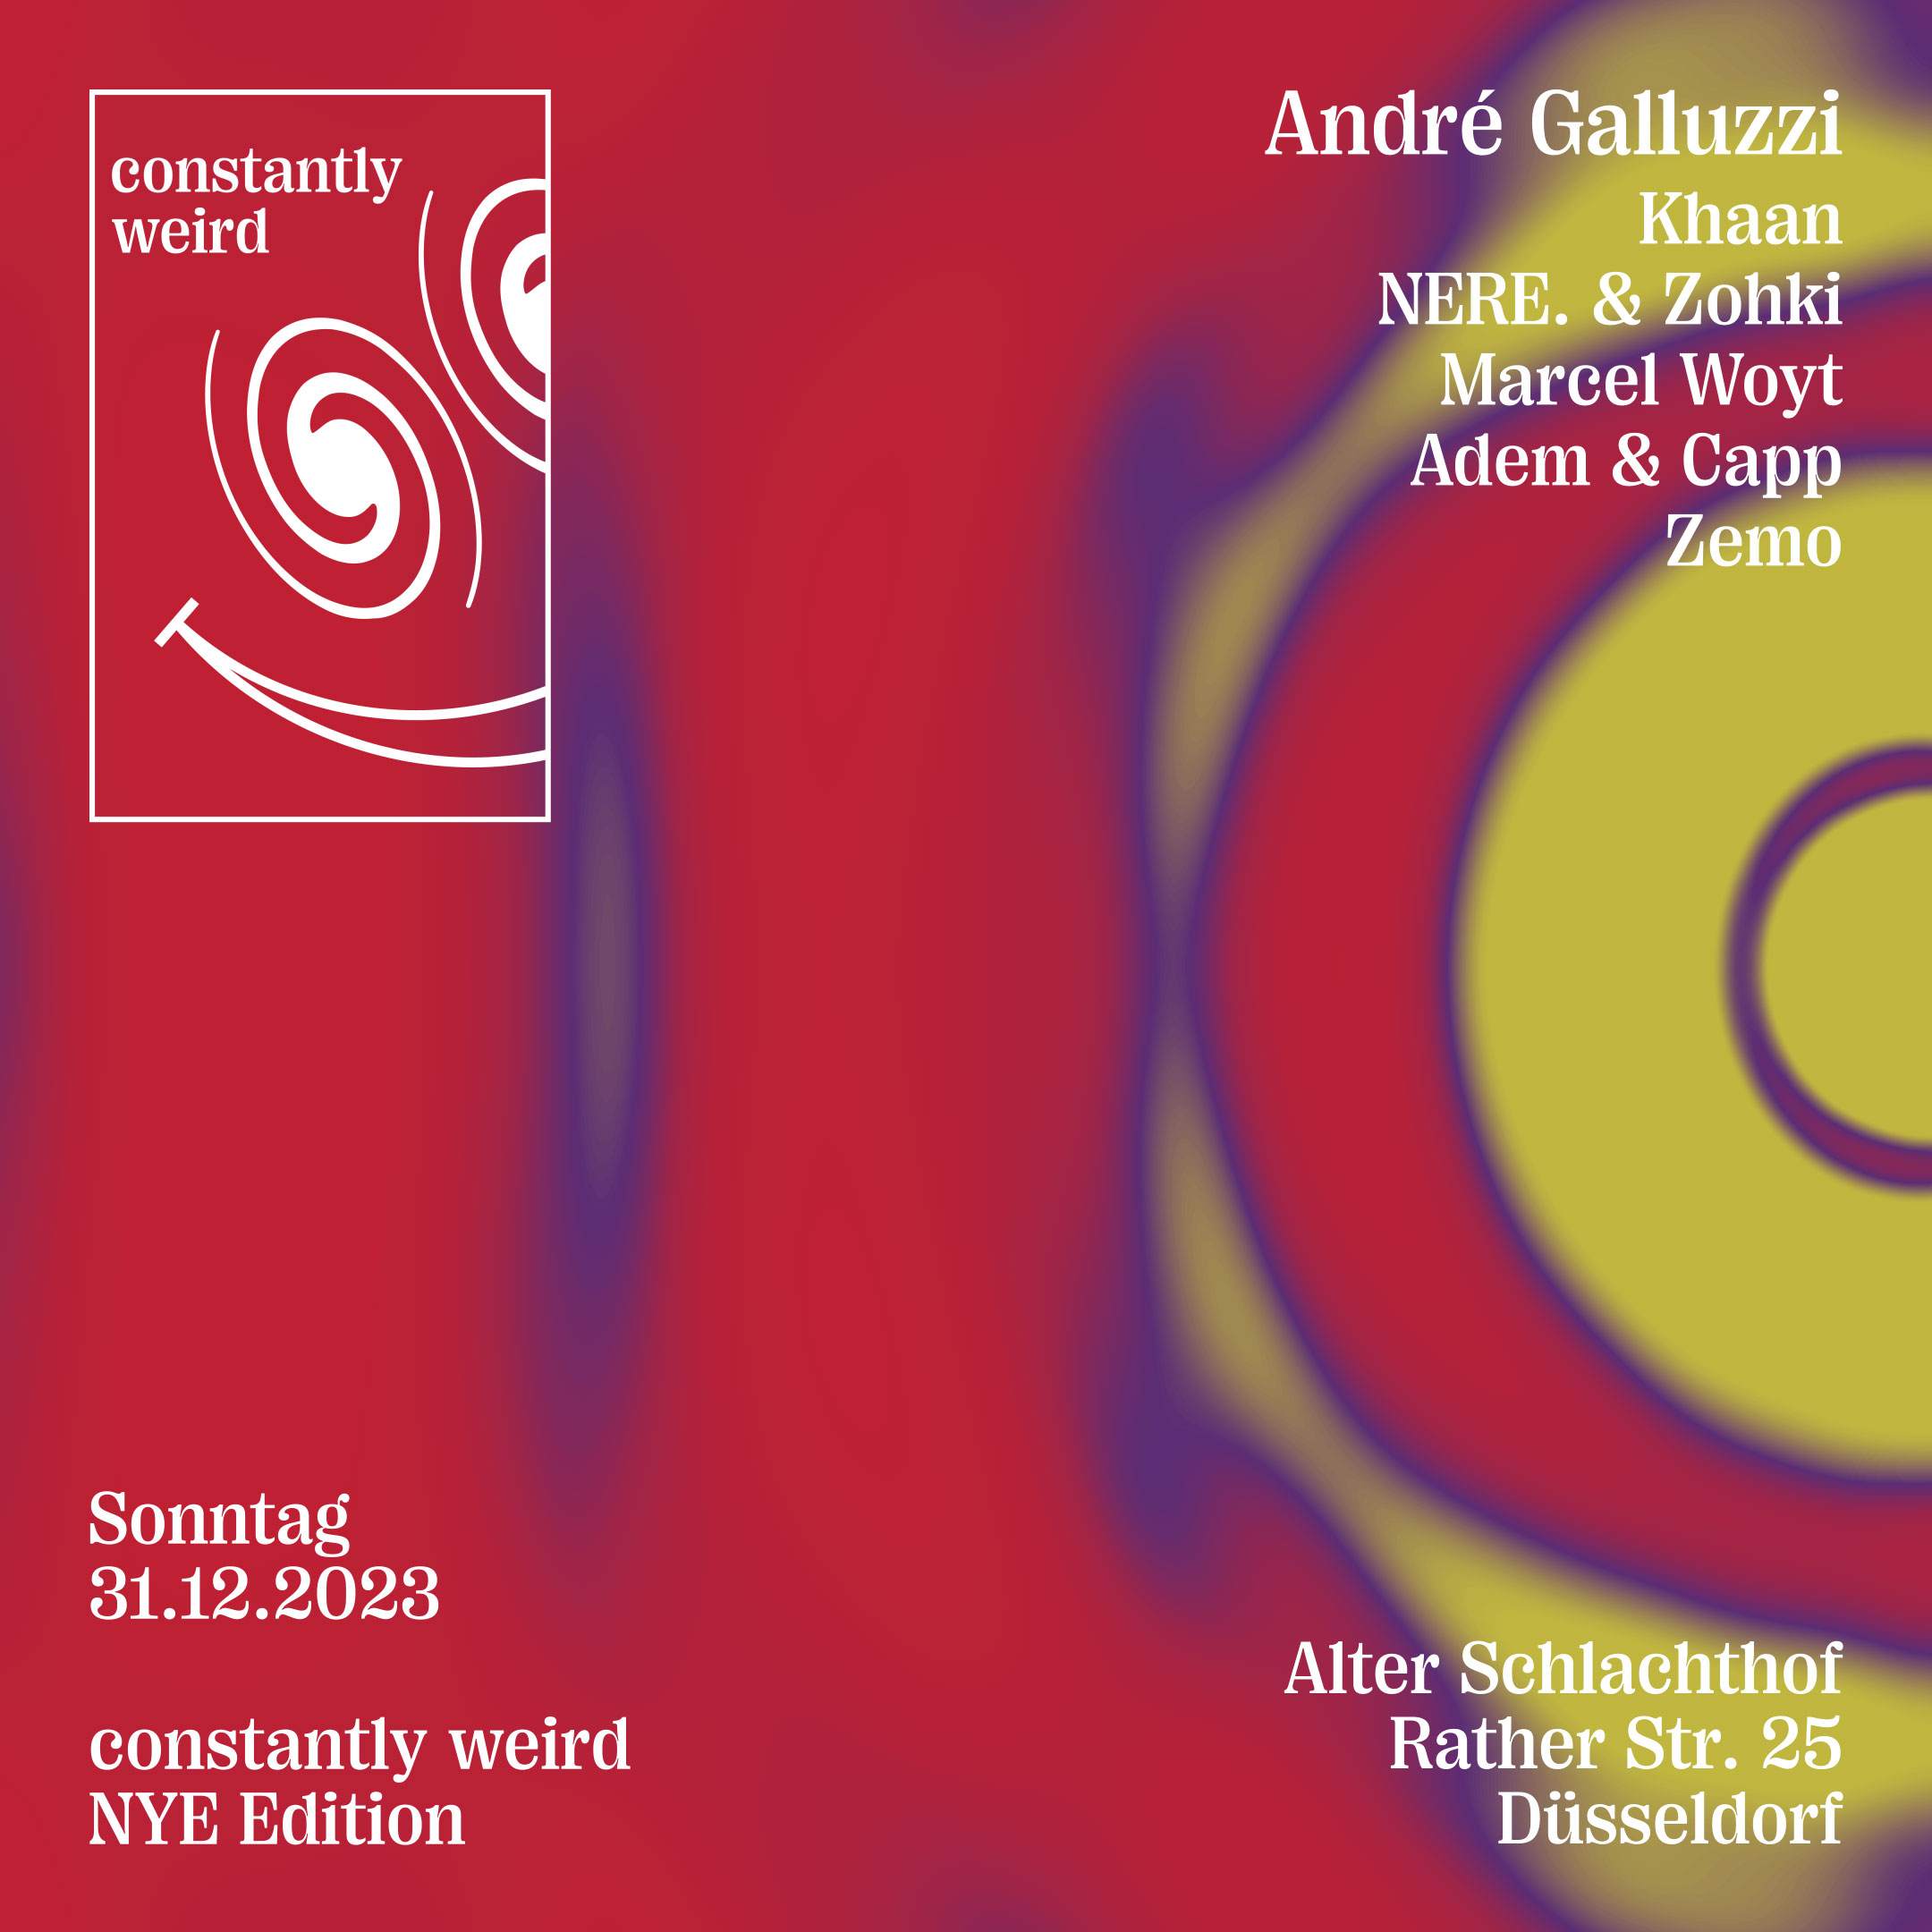 Constantly Weird with André Galluzzi (Cocoon/Ostgut Ton/Berlin) - フライヤー表